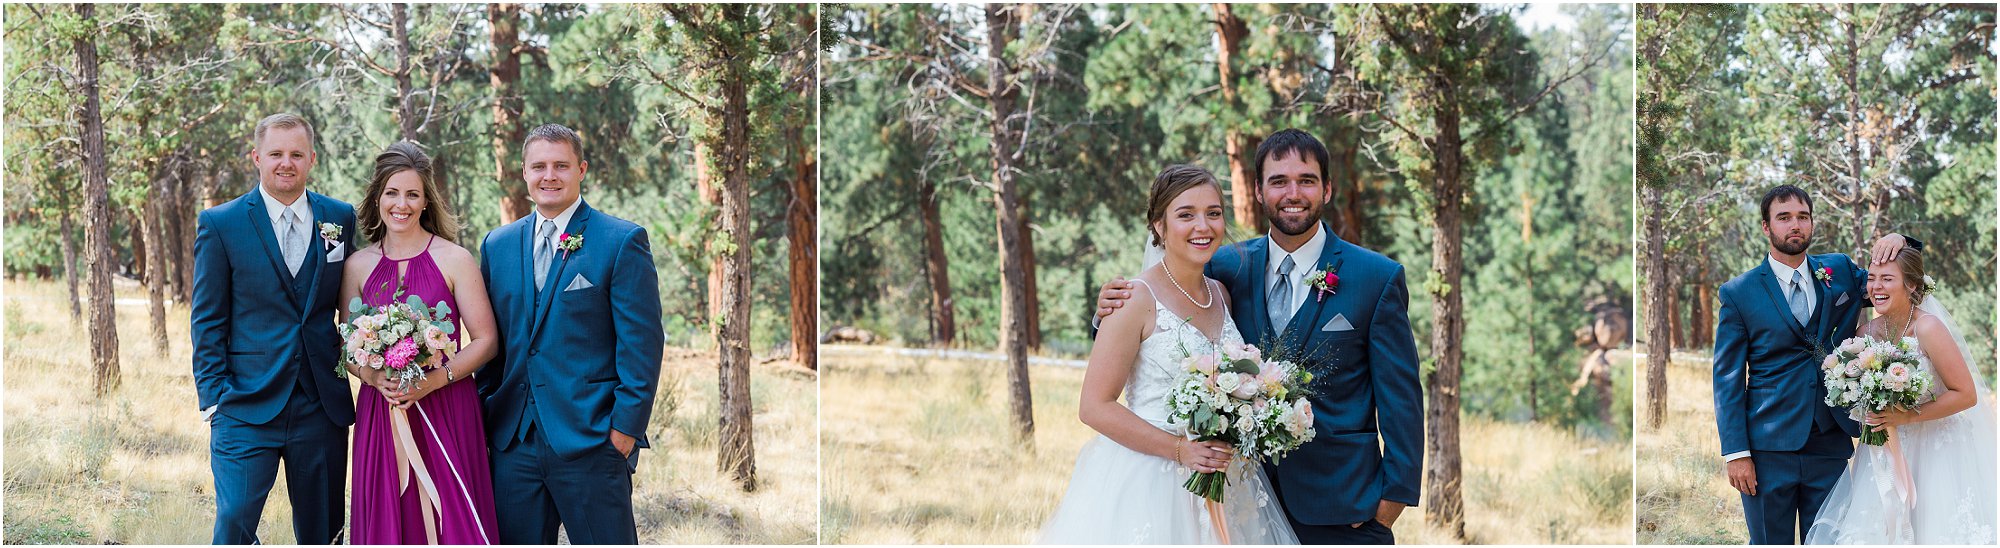 Some sibling fun at this Rock Springs Ranch wedding in Bend, OR. | Erica Swantek Photography